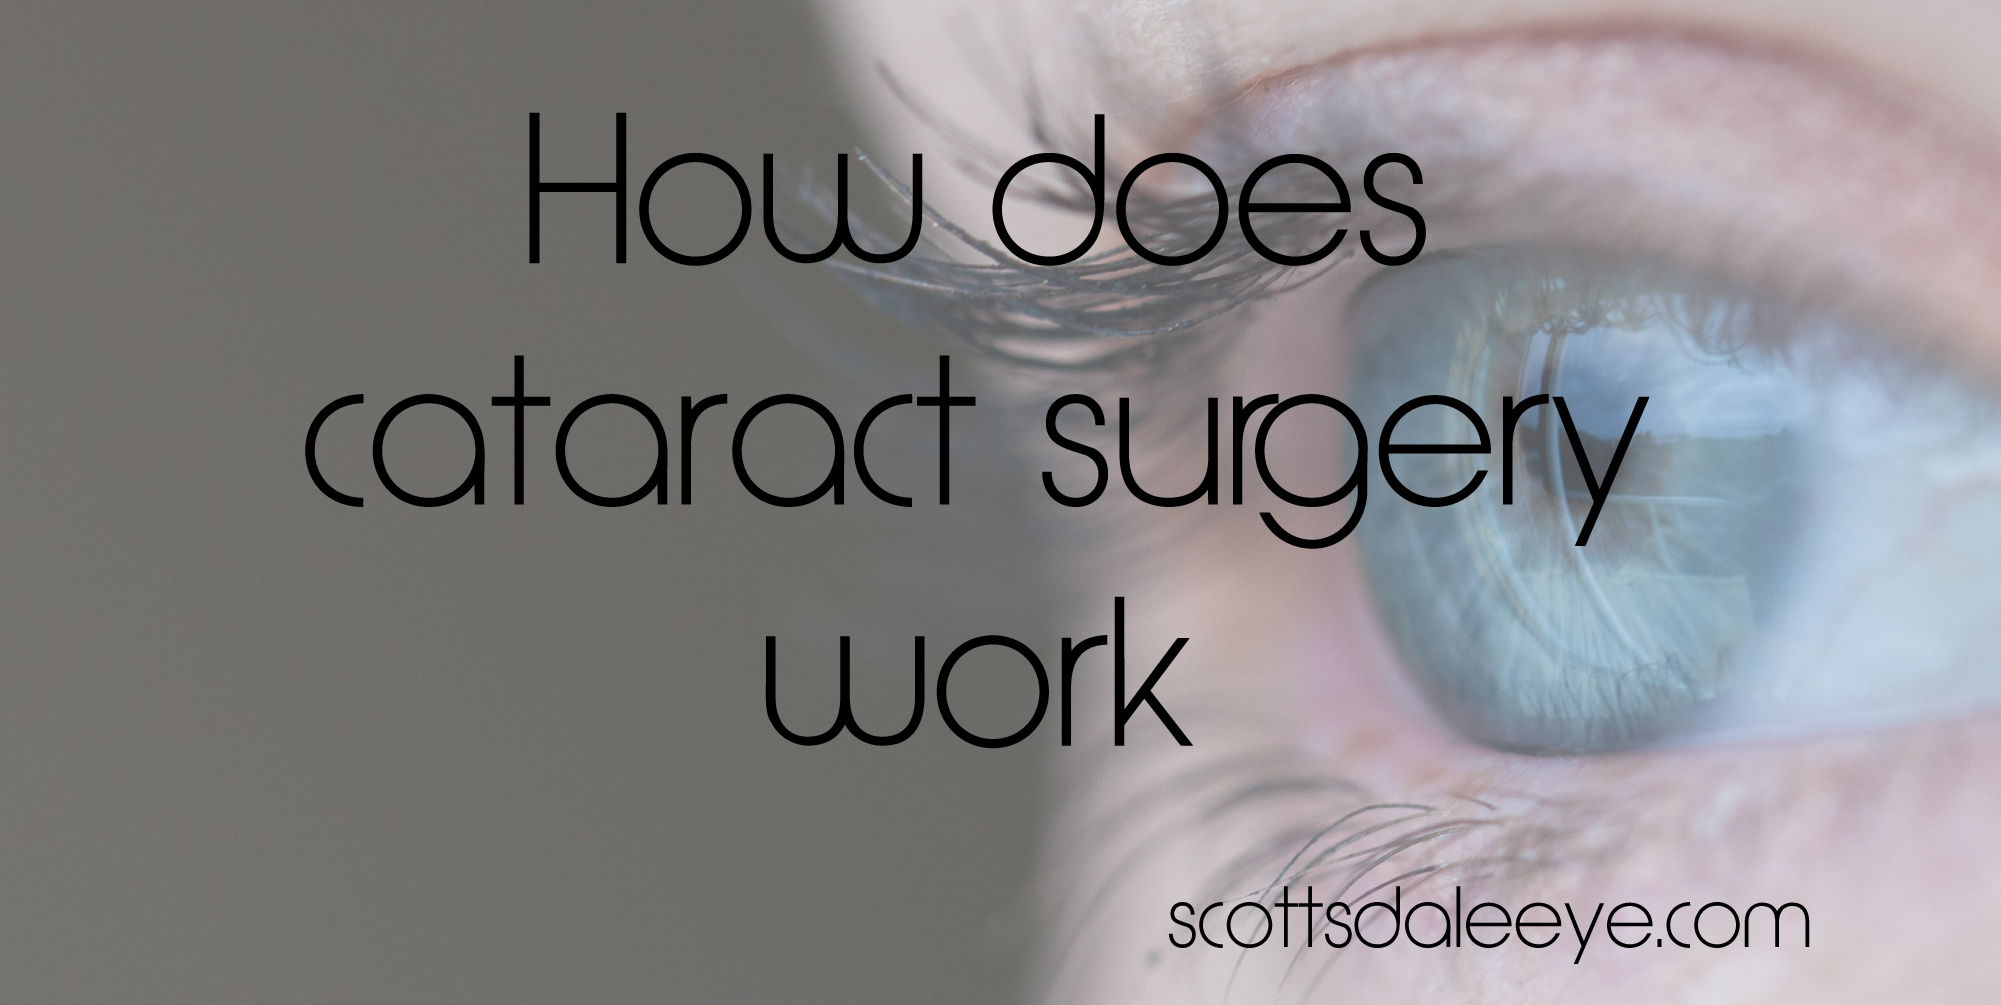 How does cataract surgery work?